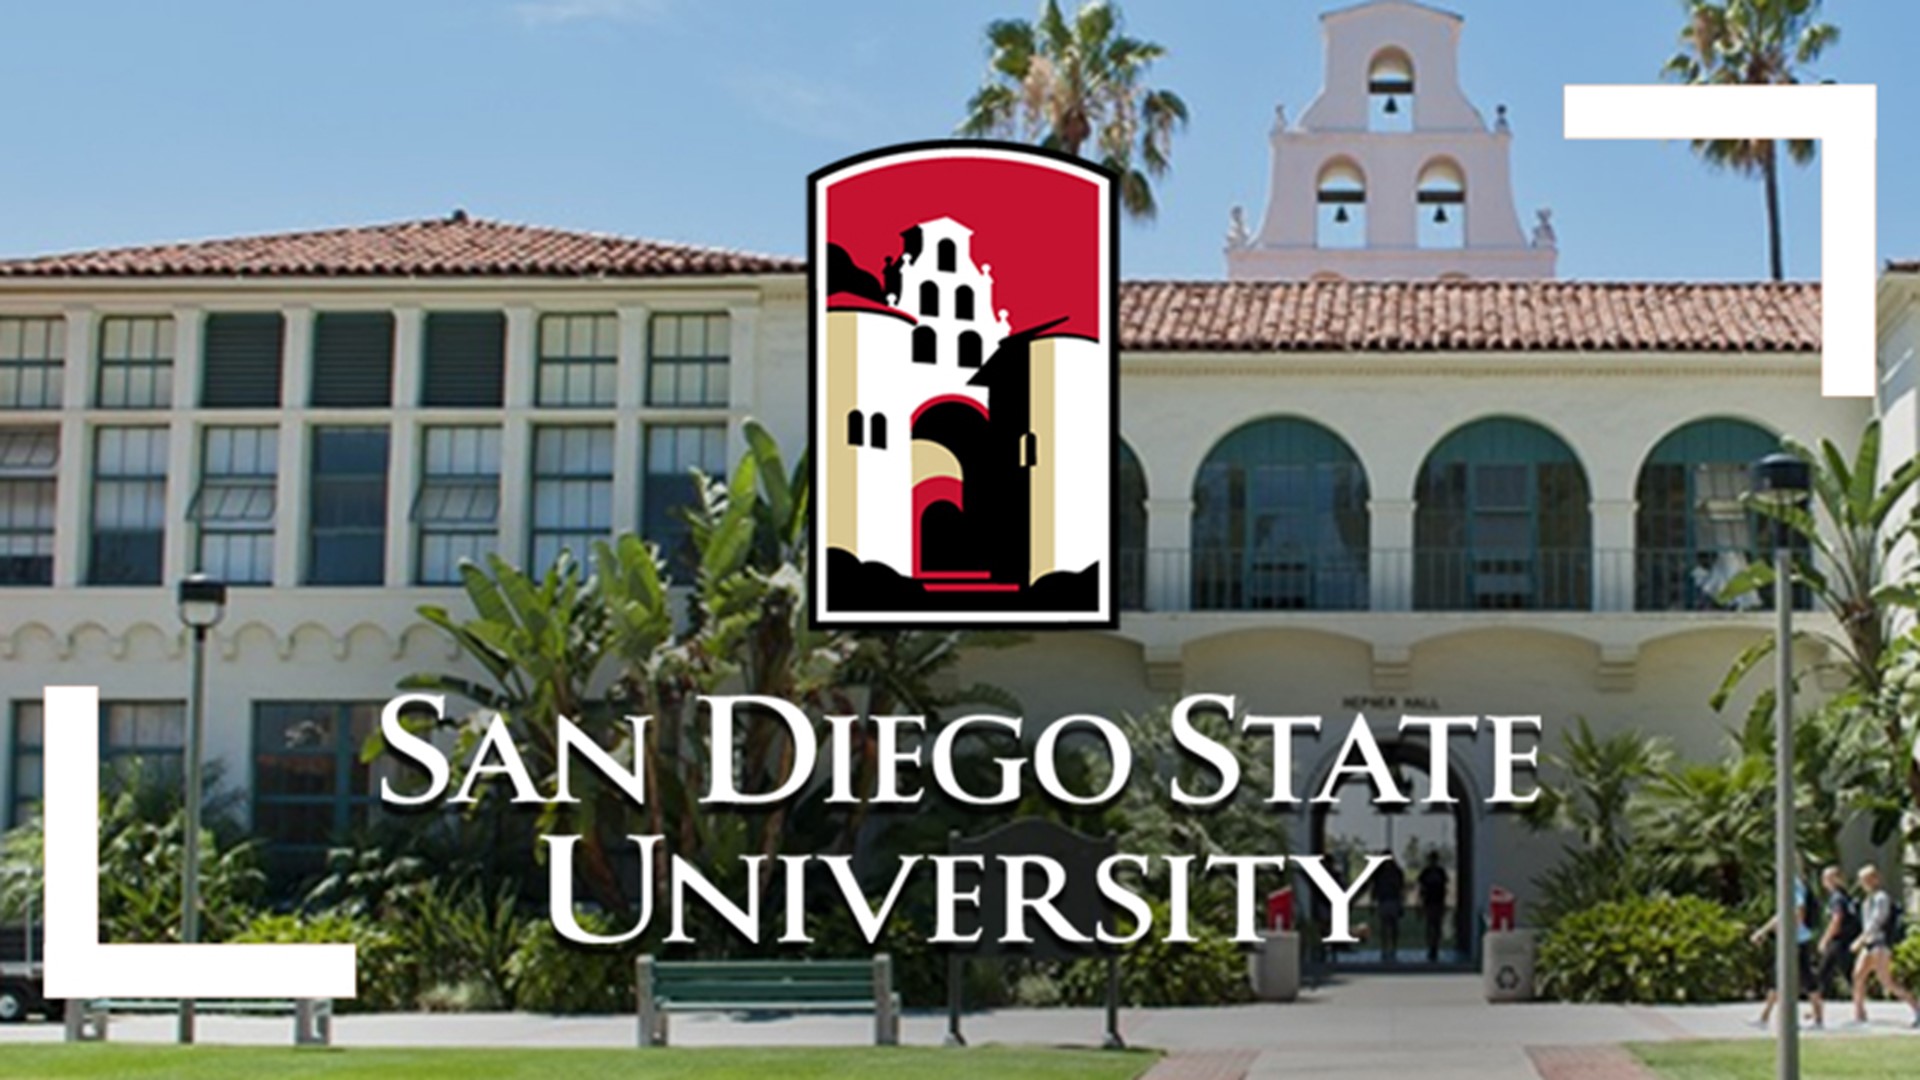 SDSU said the County Health and Human Services Department is working to investigate 14 different clusters of the virus in various off-campus locations in the College